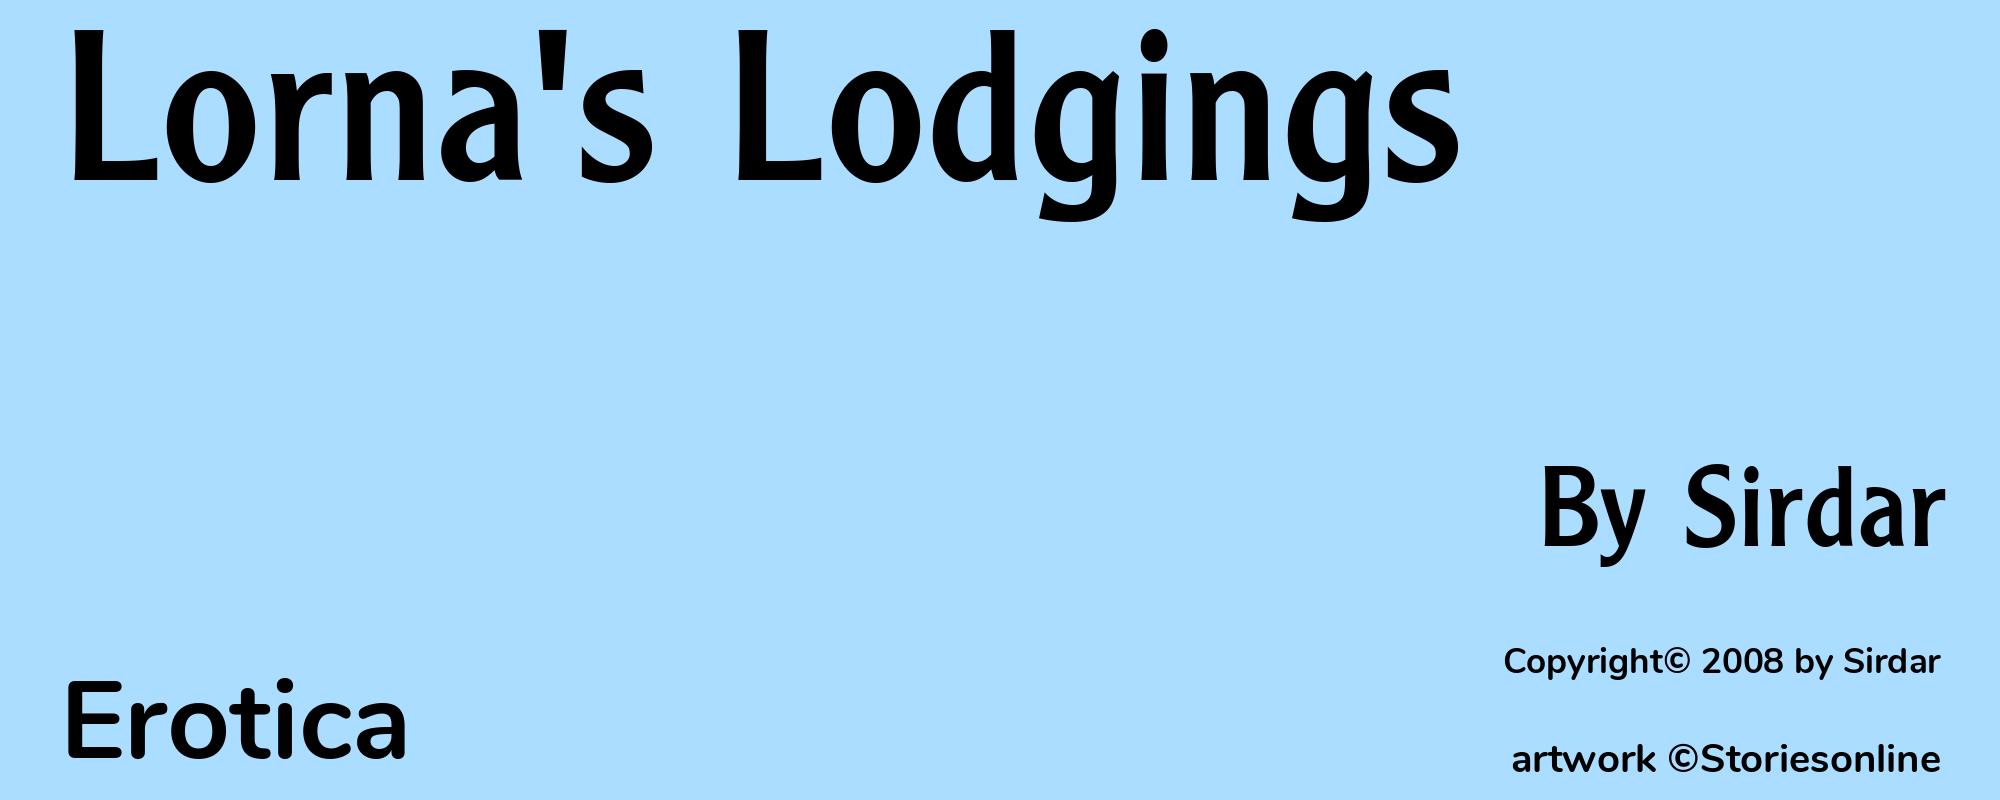 Lorna's Lodgings - Cover